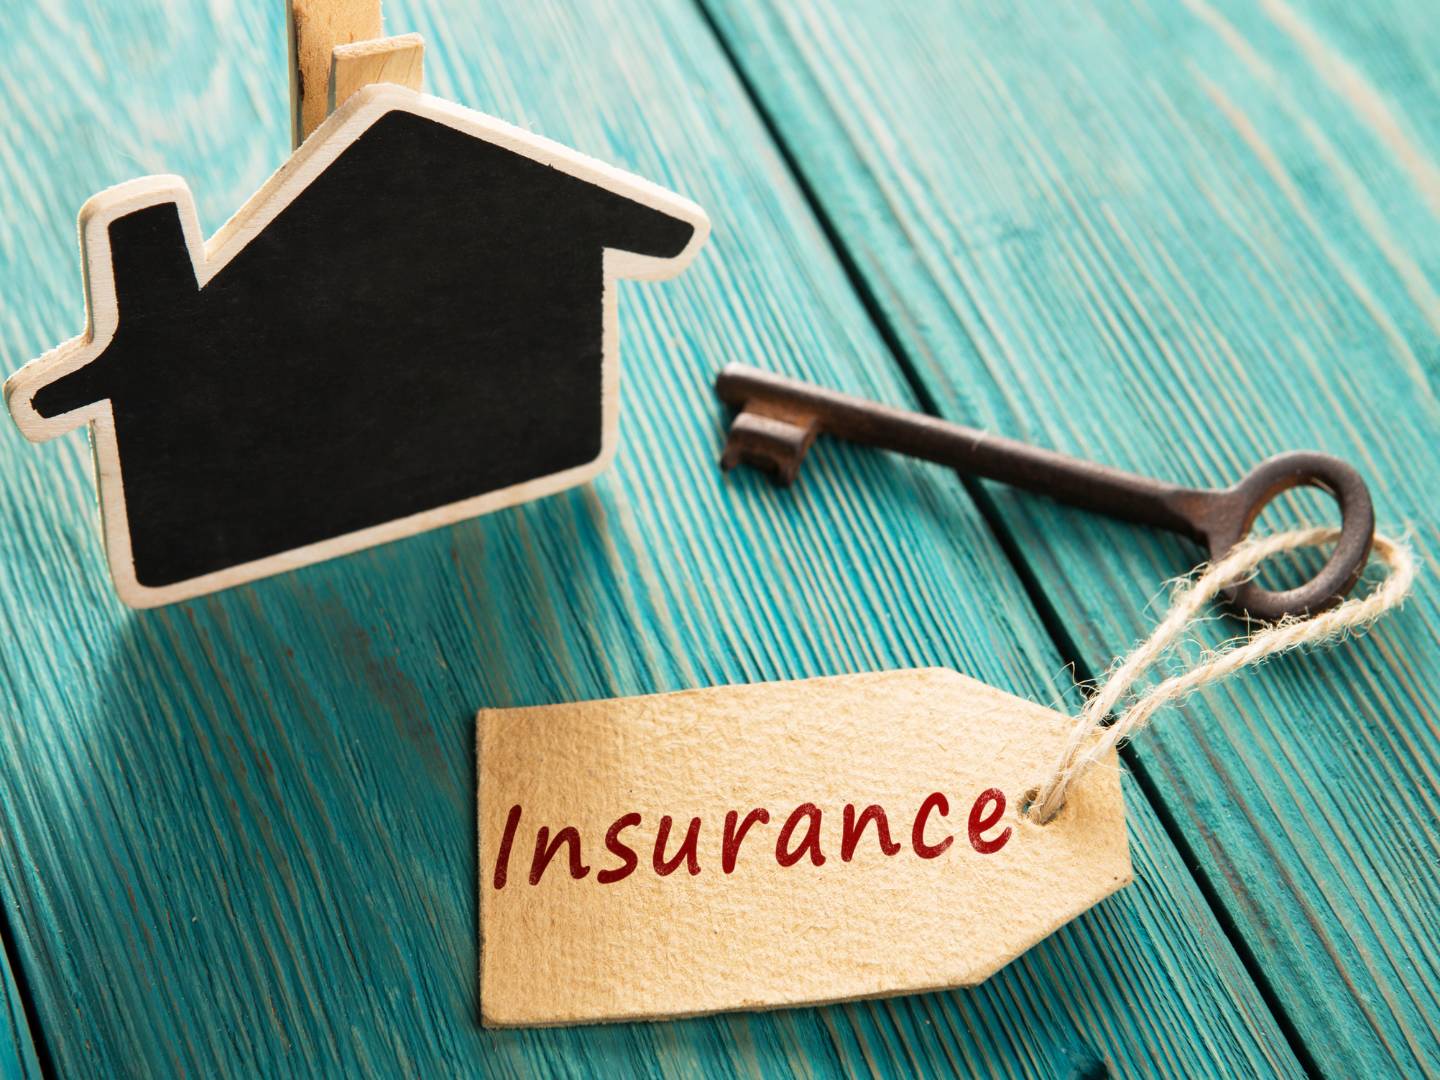 Landlord insurance for rental properties: coverage and costs